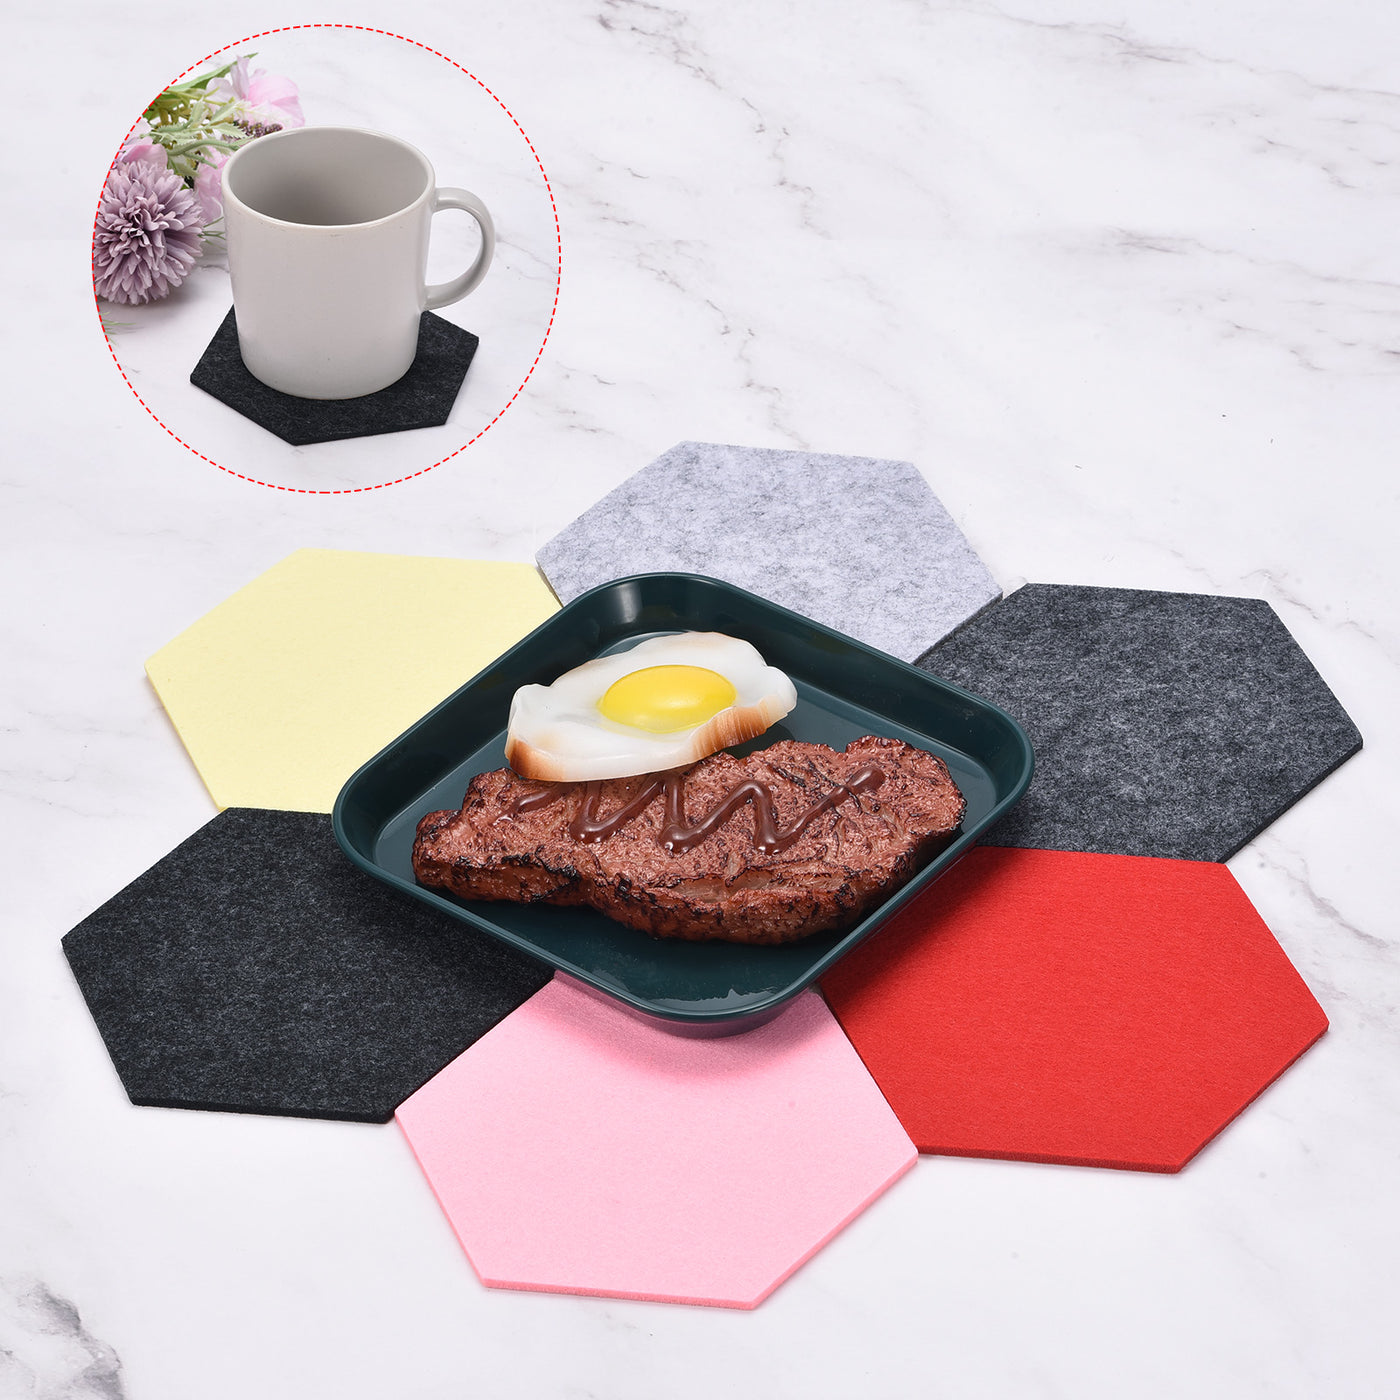 uxcell Uxcell Felt Coasters 4pcs Absorbent Pad Coaster for Drink Cup Pot Bowl Vase White